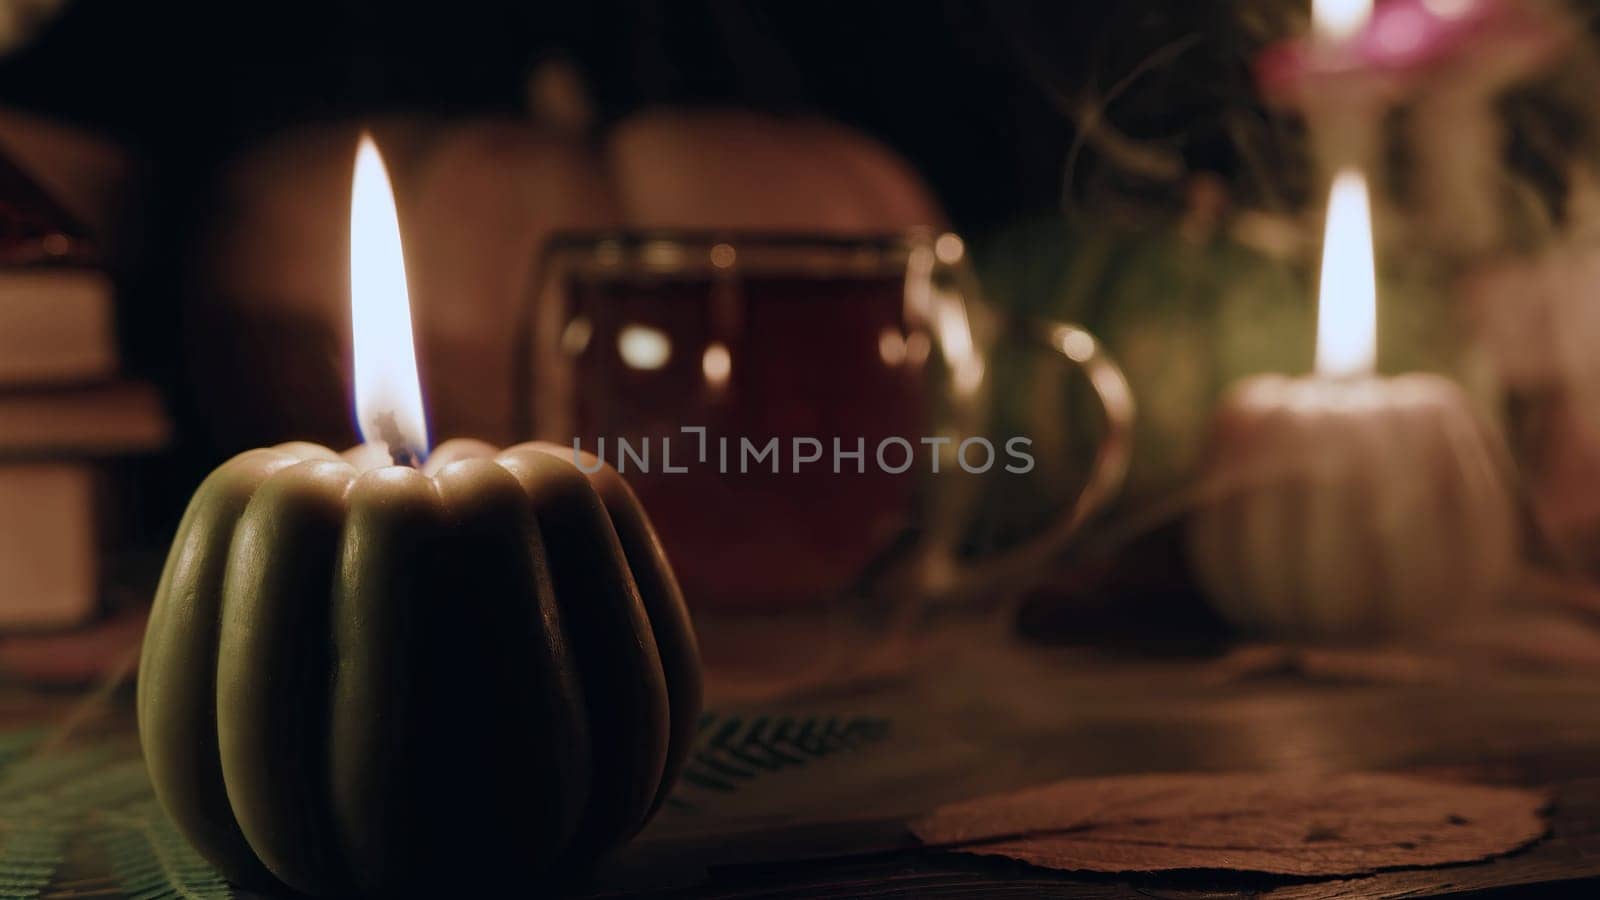 Autumn background. Pumpkin candle, orange fallen leaves. Copy space. Flat lay. Cozy ambiance of fall, candle burning. Seasonal promotions or tranquil visual storytelling.